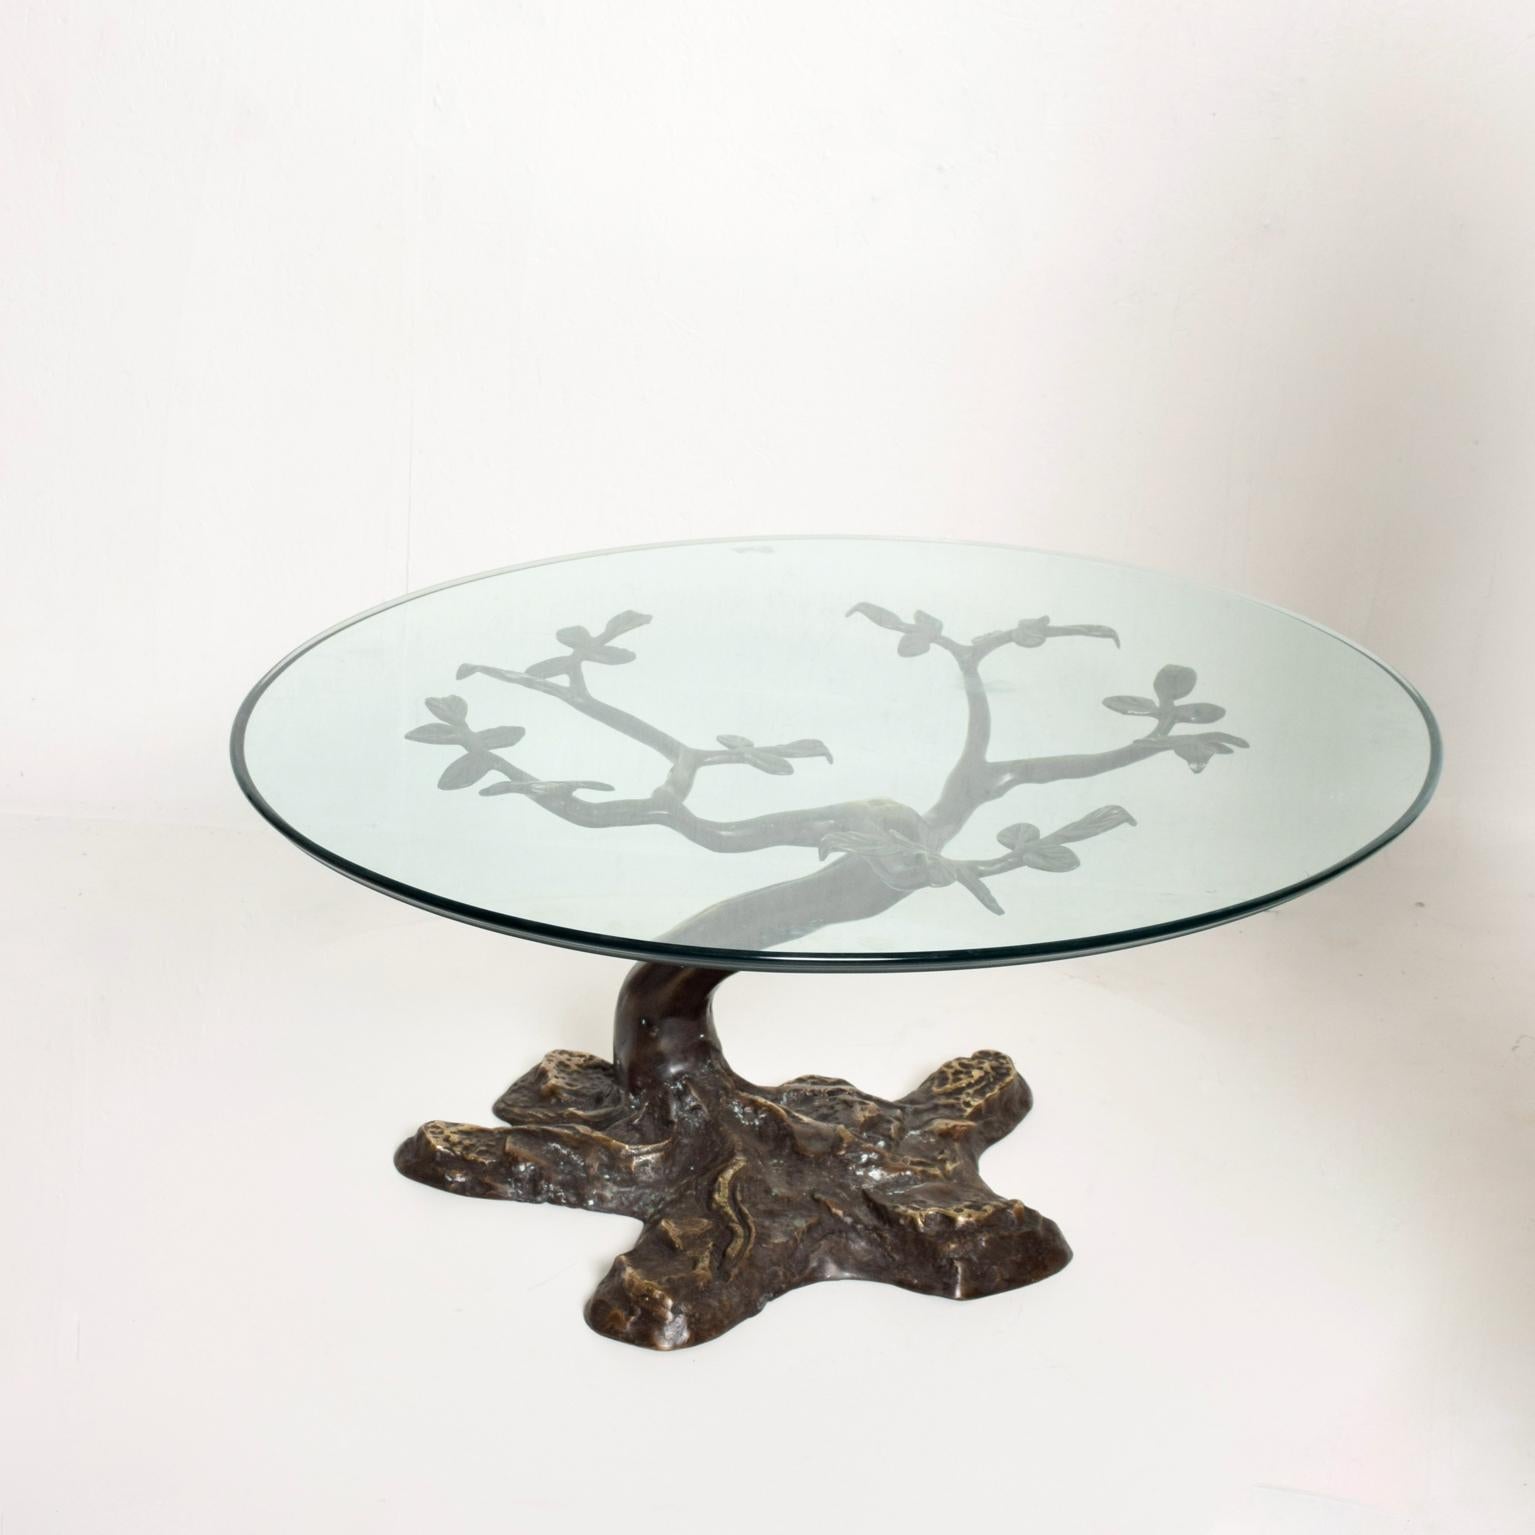 We are pleased to offer for your consideration a beautiful bronze coffee table designed by Willy Daro. Beautiful bonsai tree in cast bronze sculpture with round glass top. Dimensions: 32